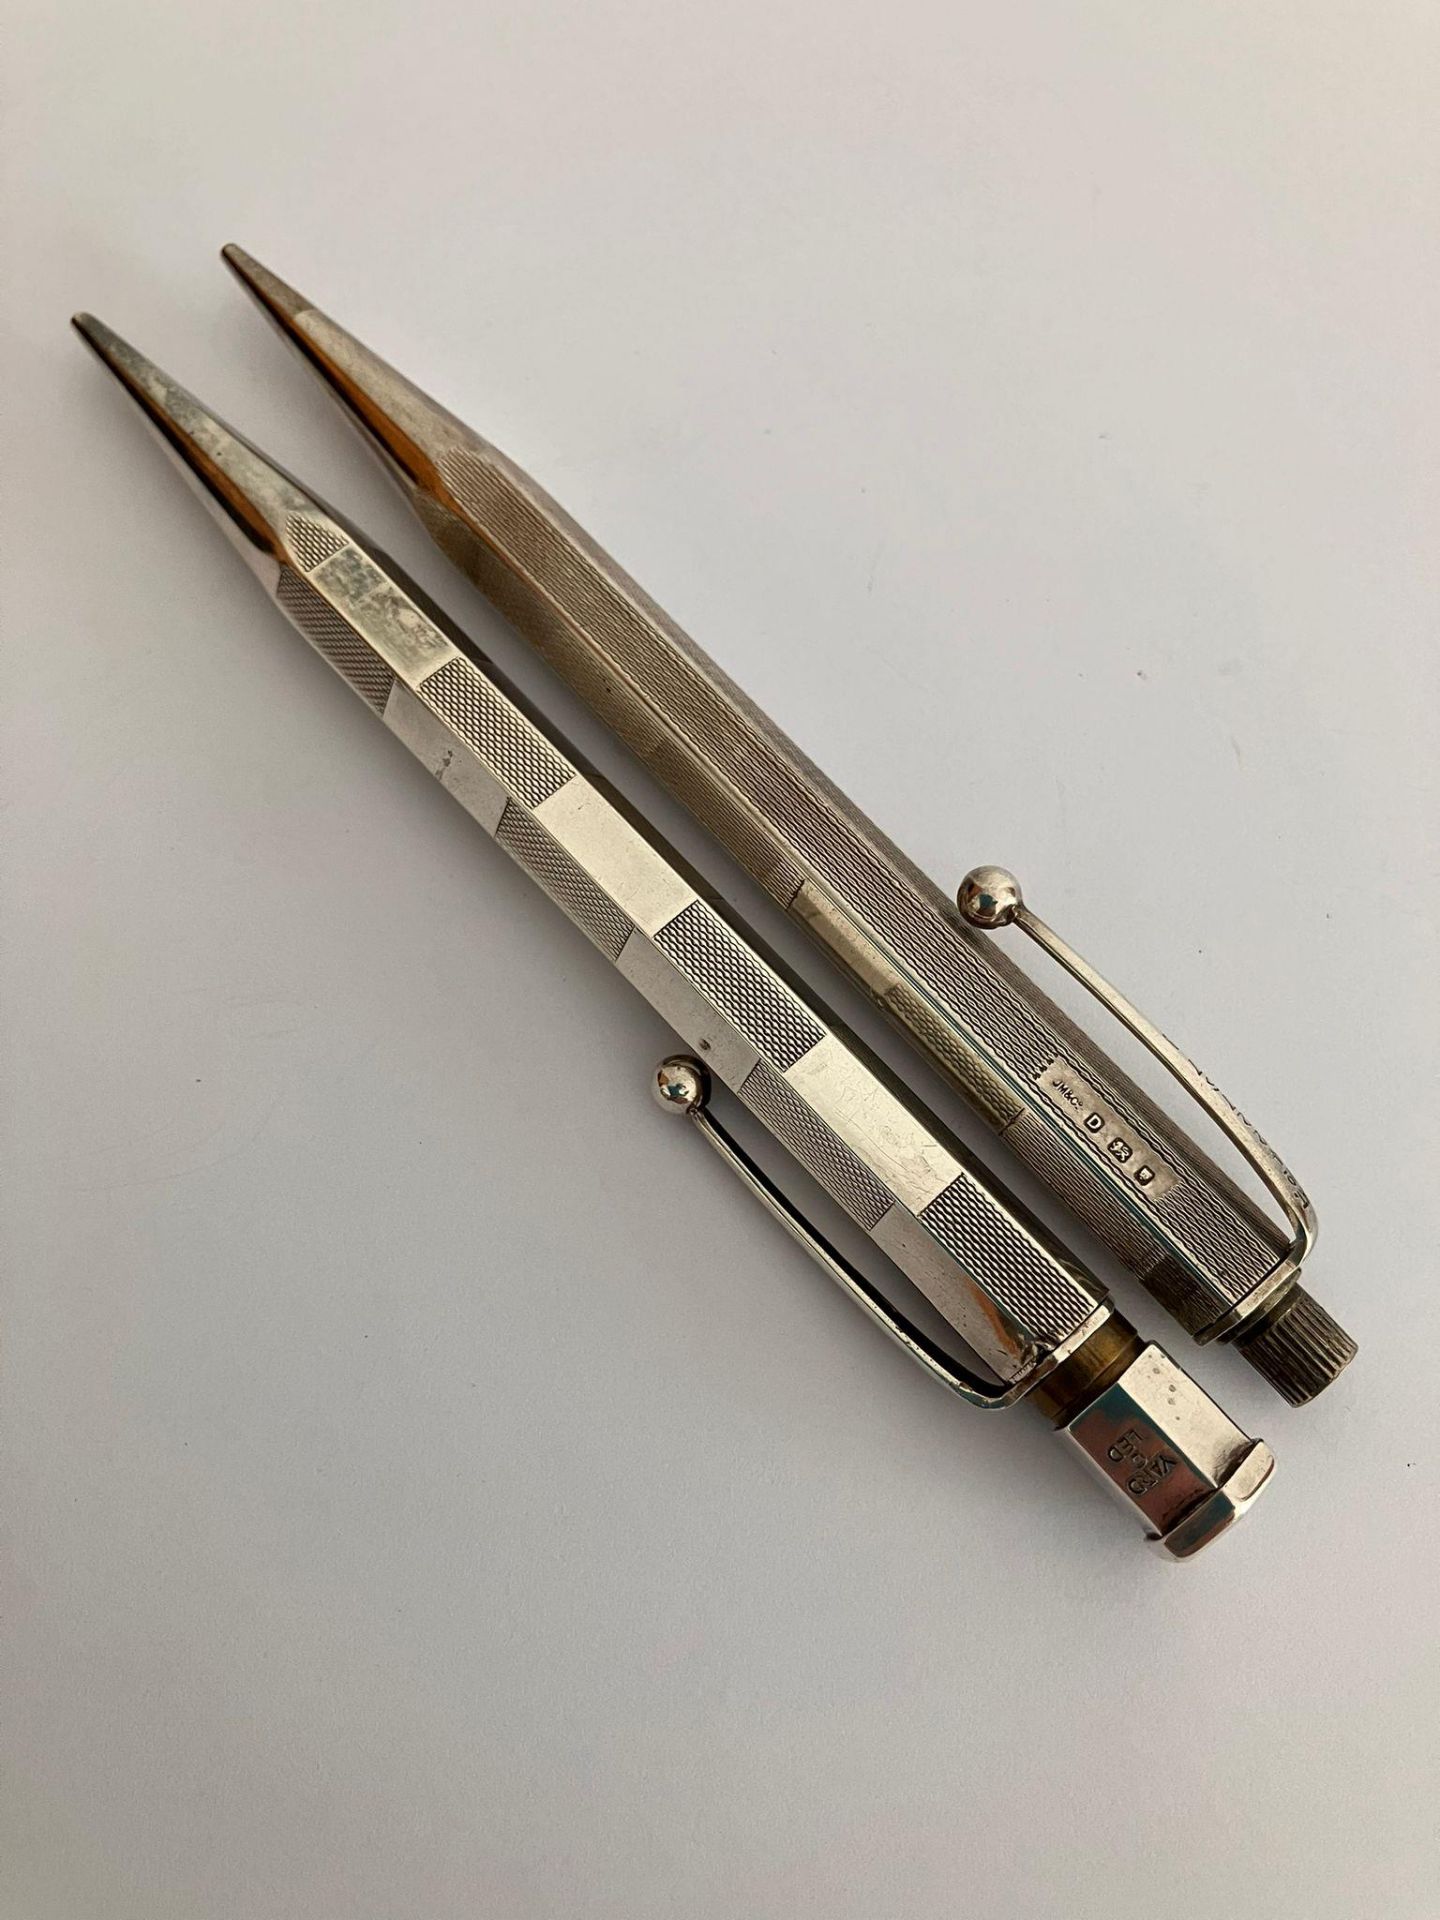 2 x Vintage SILVER PROPELLING PENCILS. To include a Hallmarked Johnson Matthey 1939. Together with a